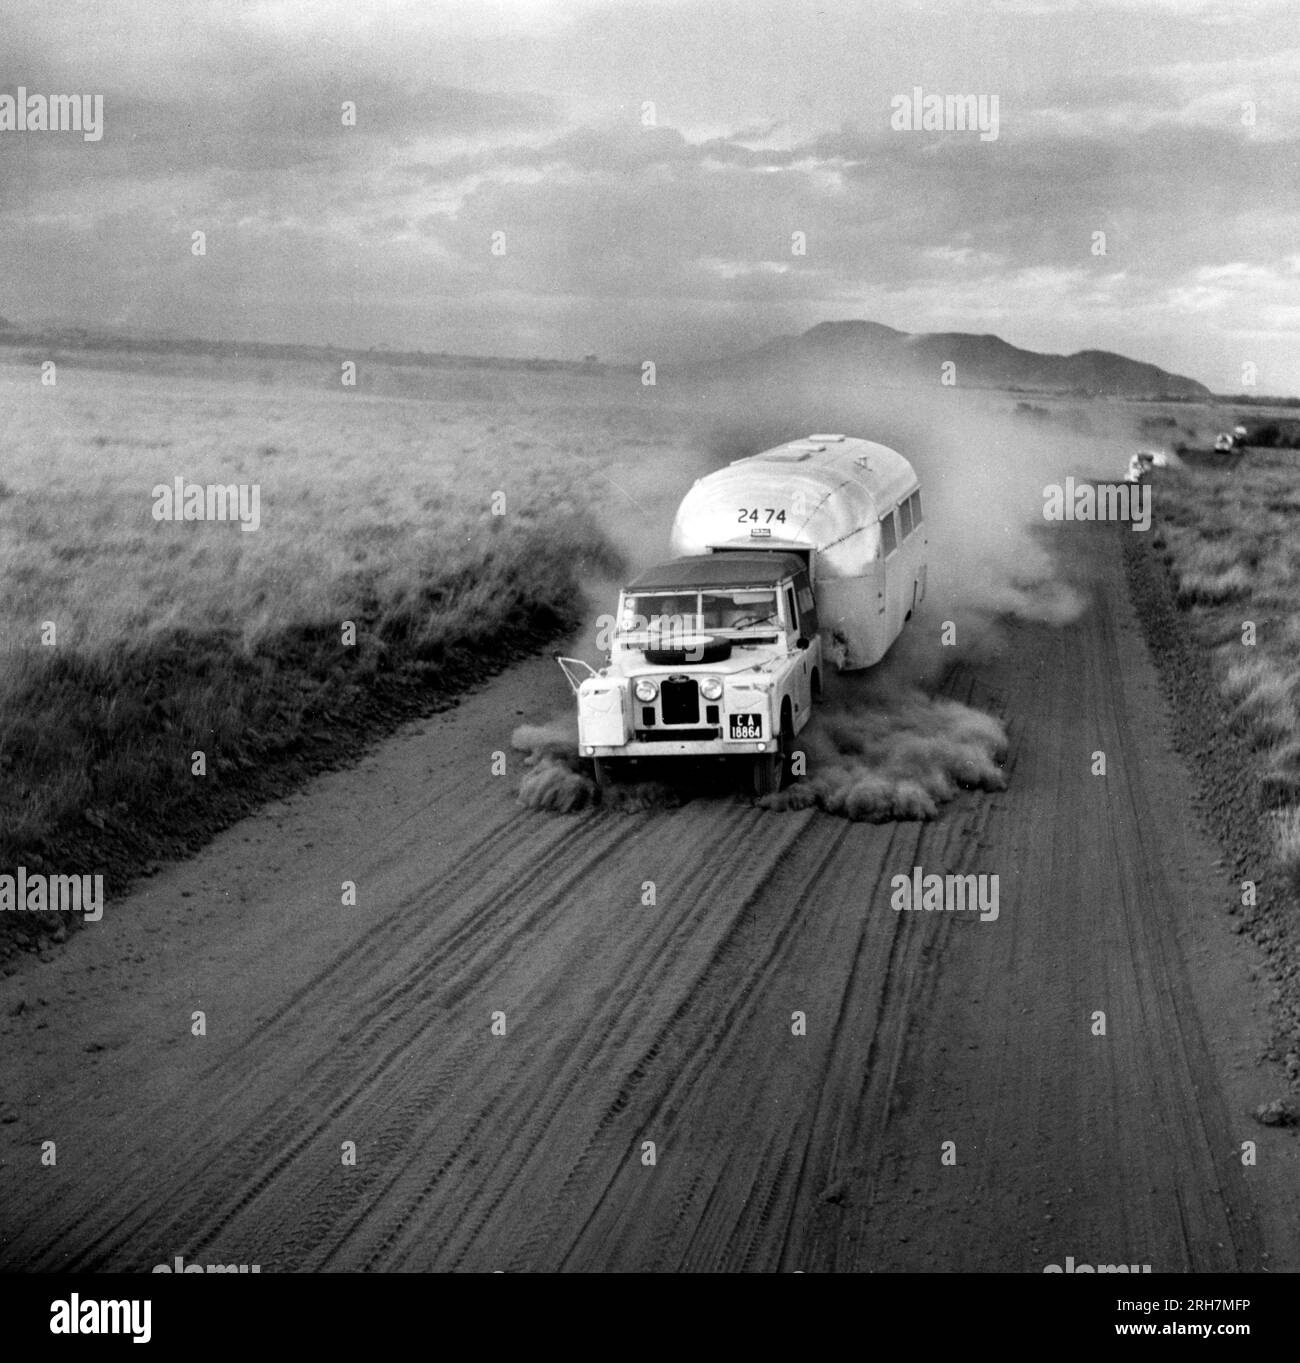 Airstream Trailer being pulled down a dusty road near Wajir, Kenya in Africa Stock Photo